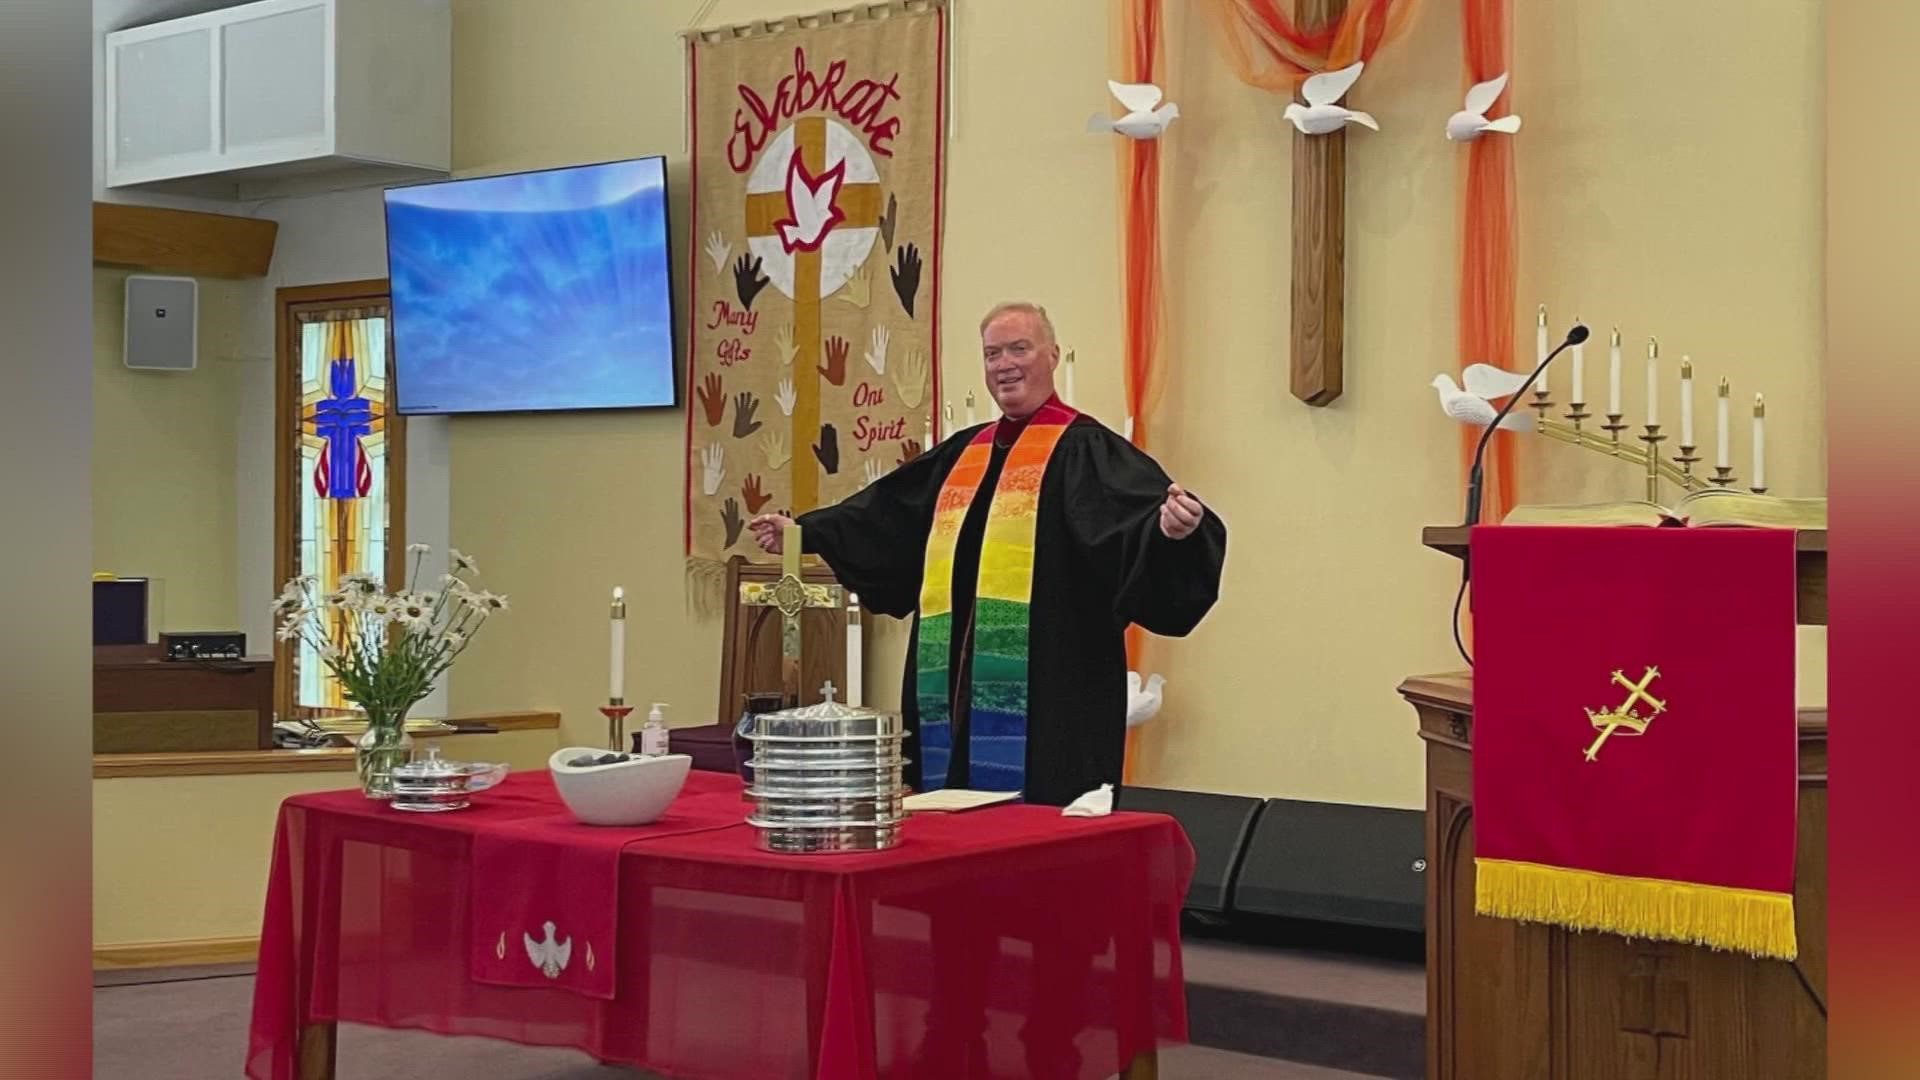 Rev. Douglas G. Grace is now ordained as the pastor at Prince of Peace in Pickerington, a move he hopes inspires more inclusion in the faith community.